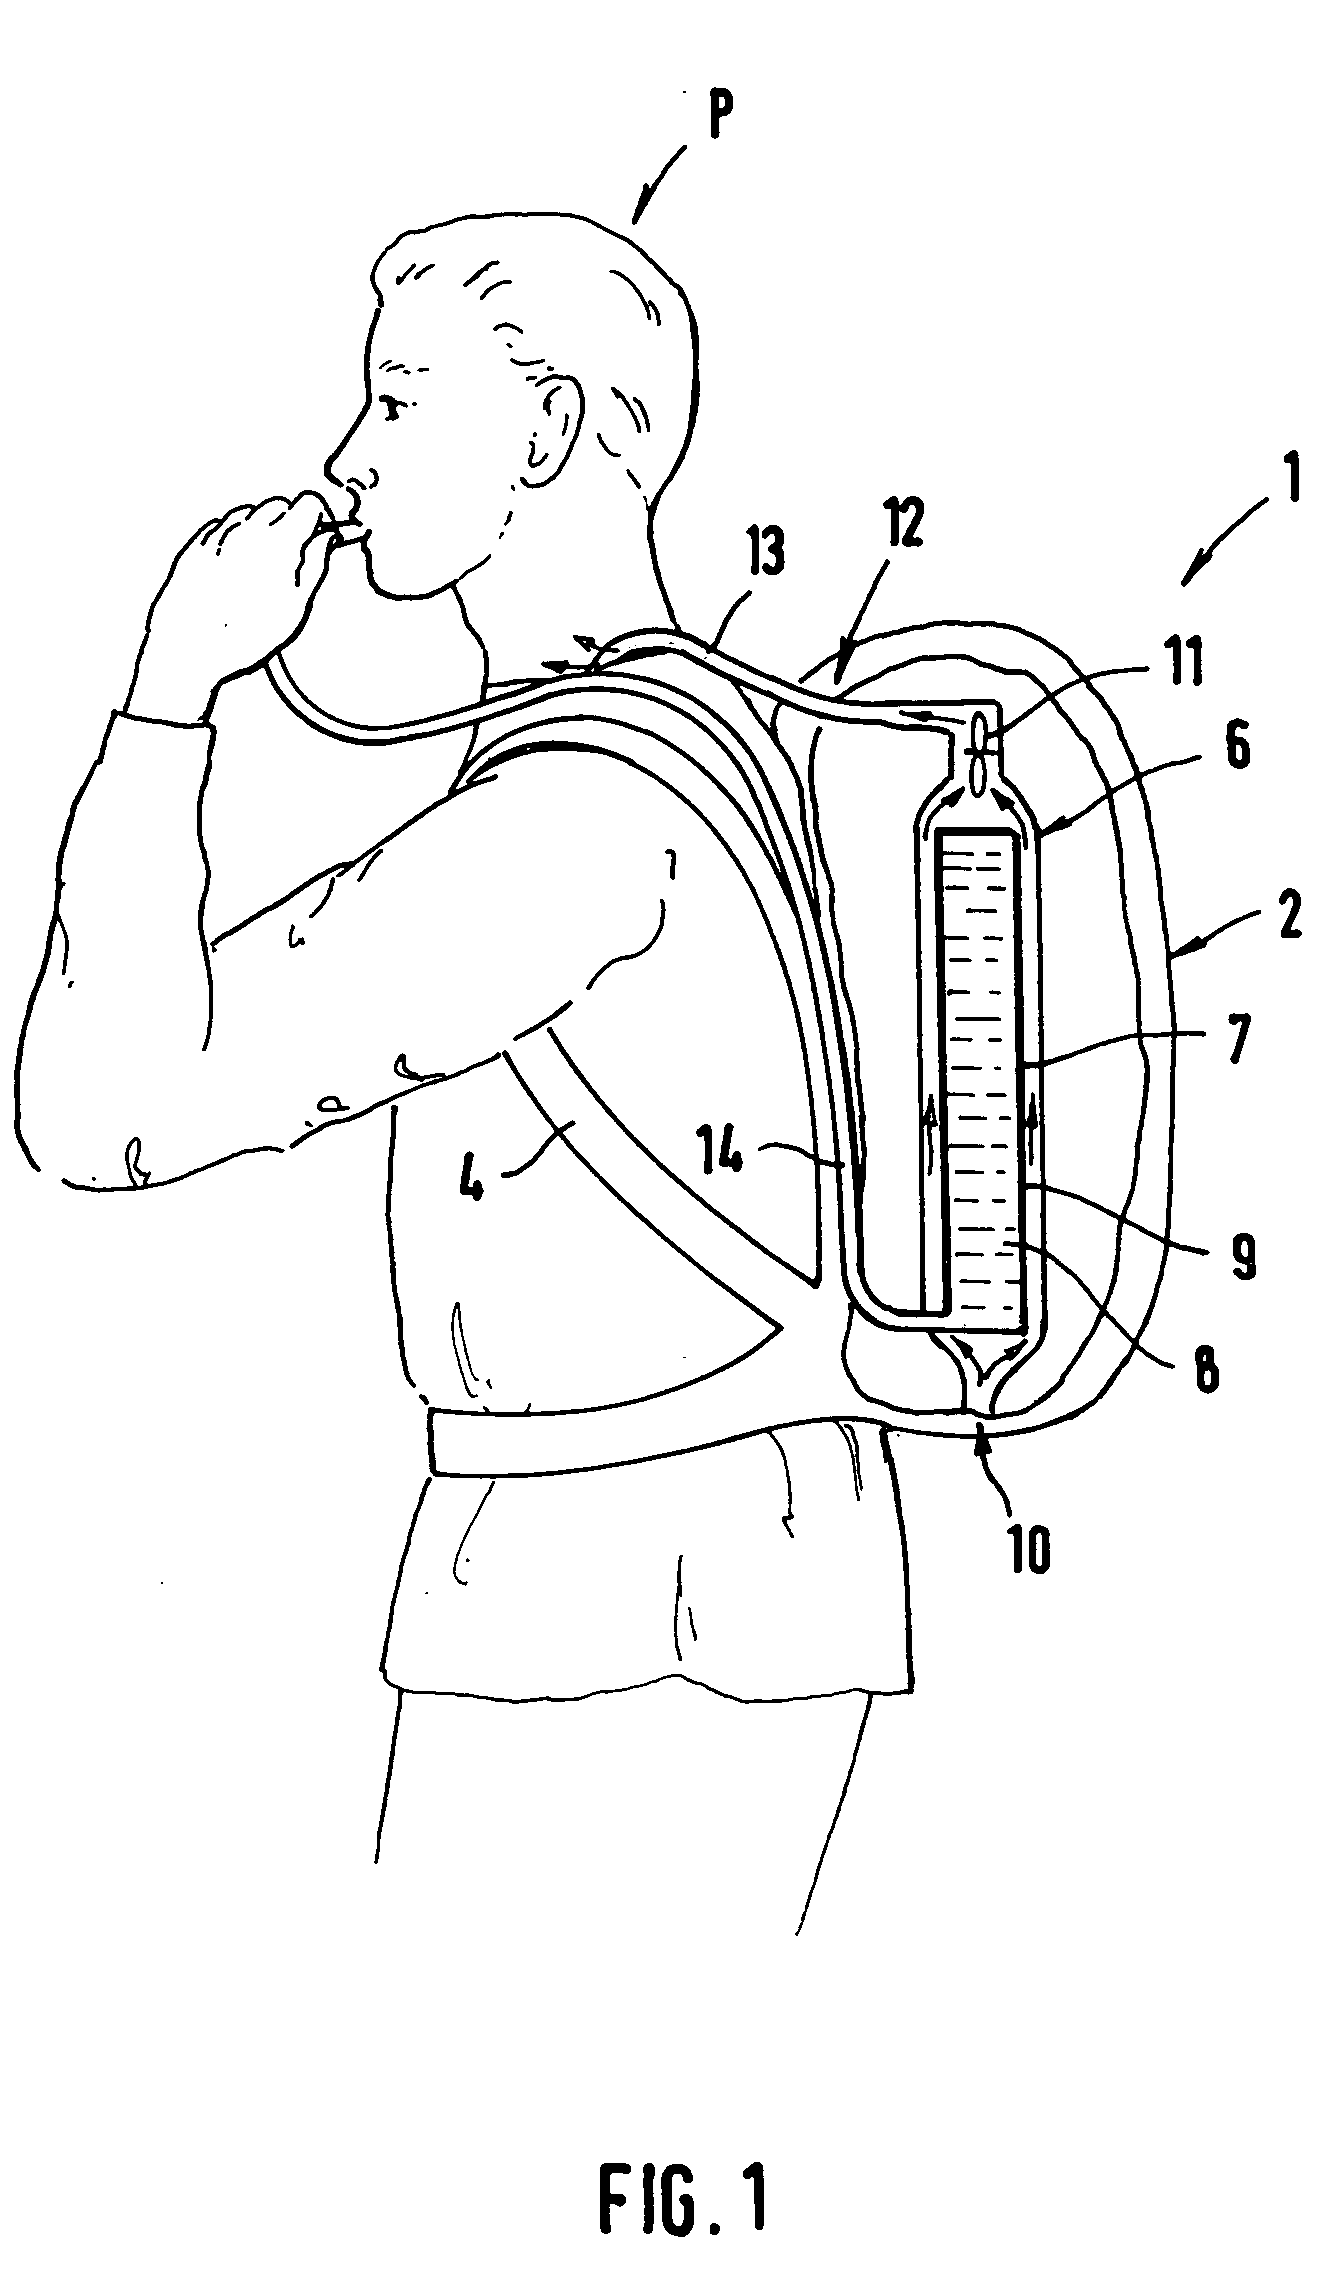 Portable, personal air conditioning unit attachable to a person